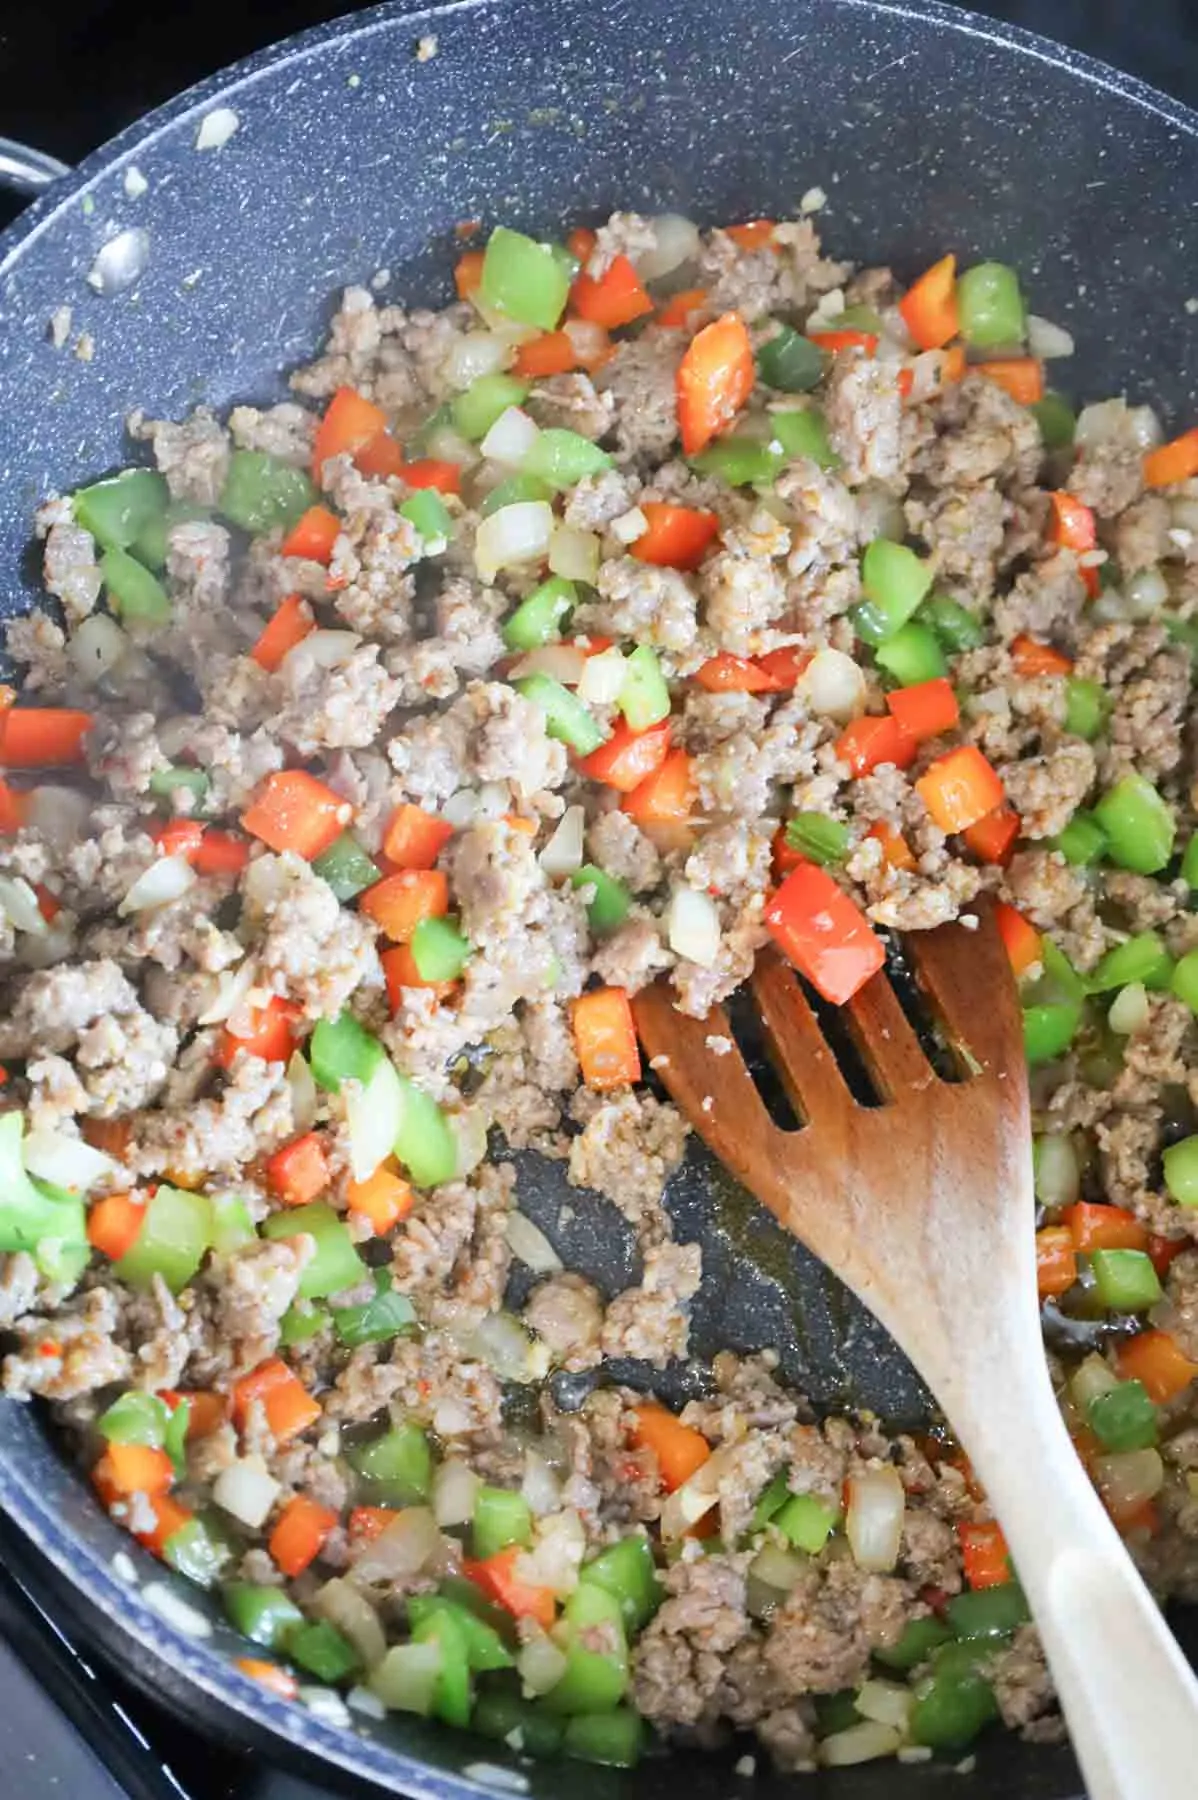 garlic, bell peppers, onions and sausage meat cooking in a skillet